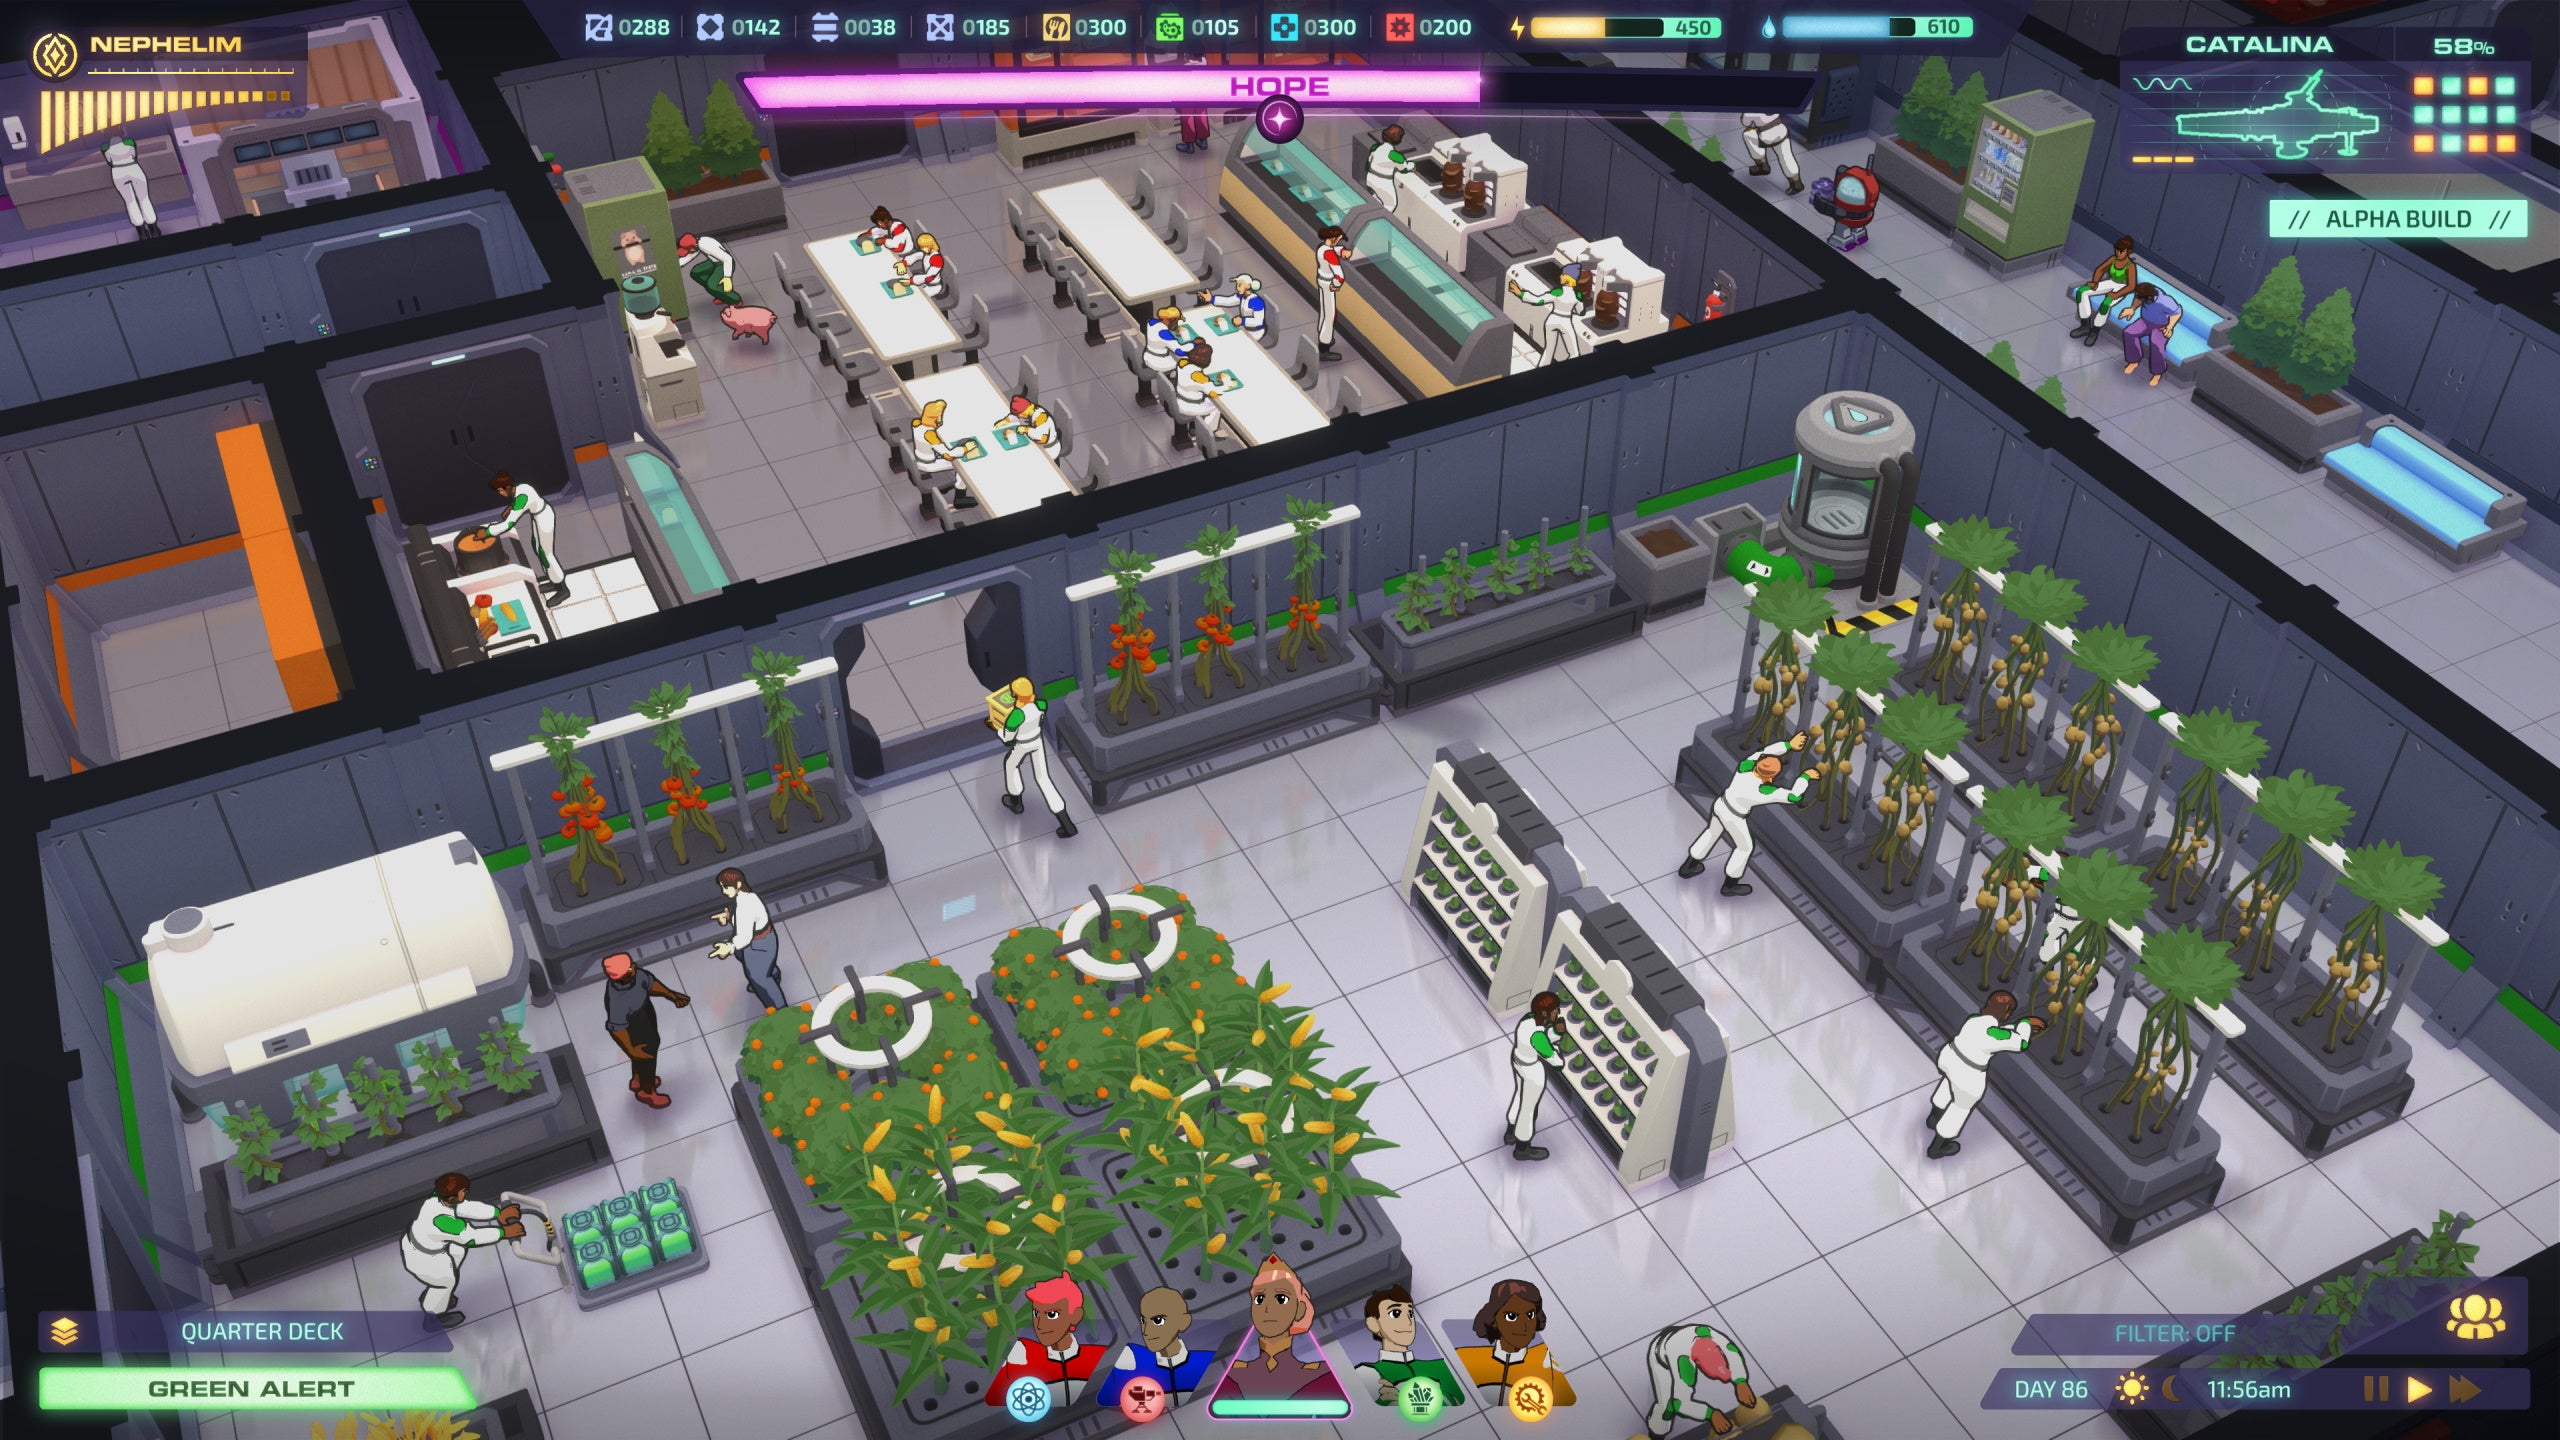 A busy greenhouse room on board a spaceship in Jumplight Odyssey